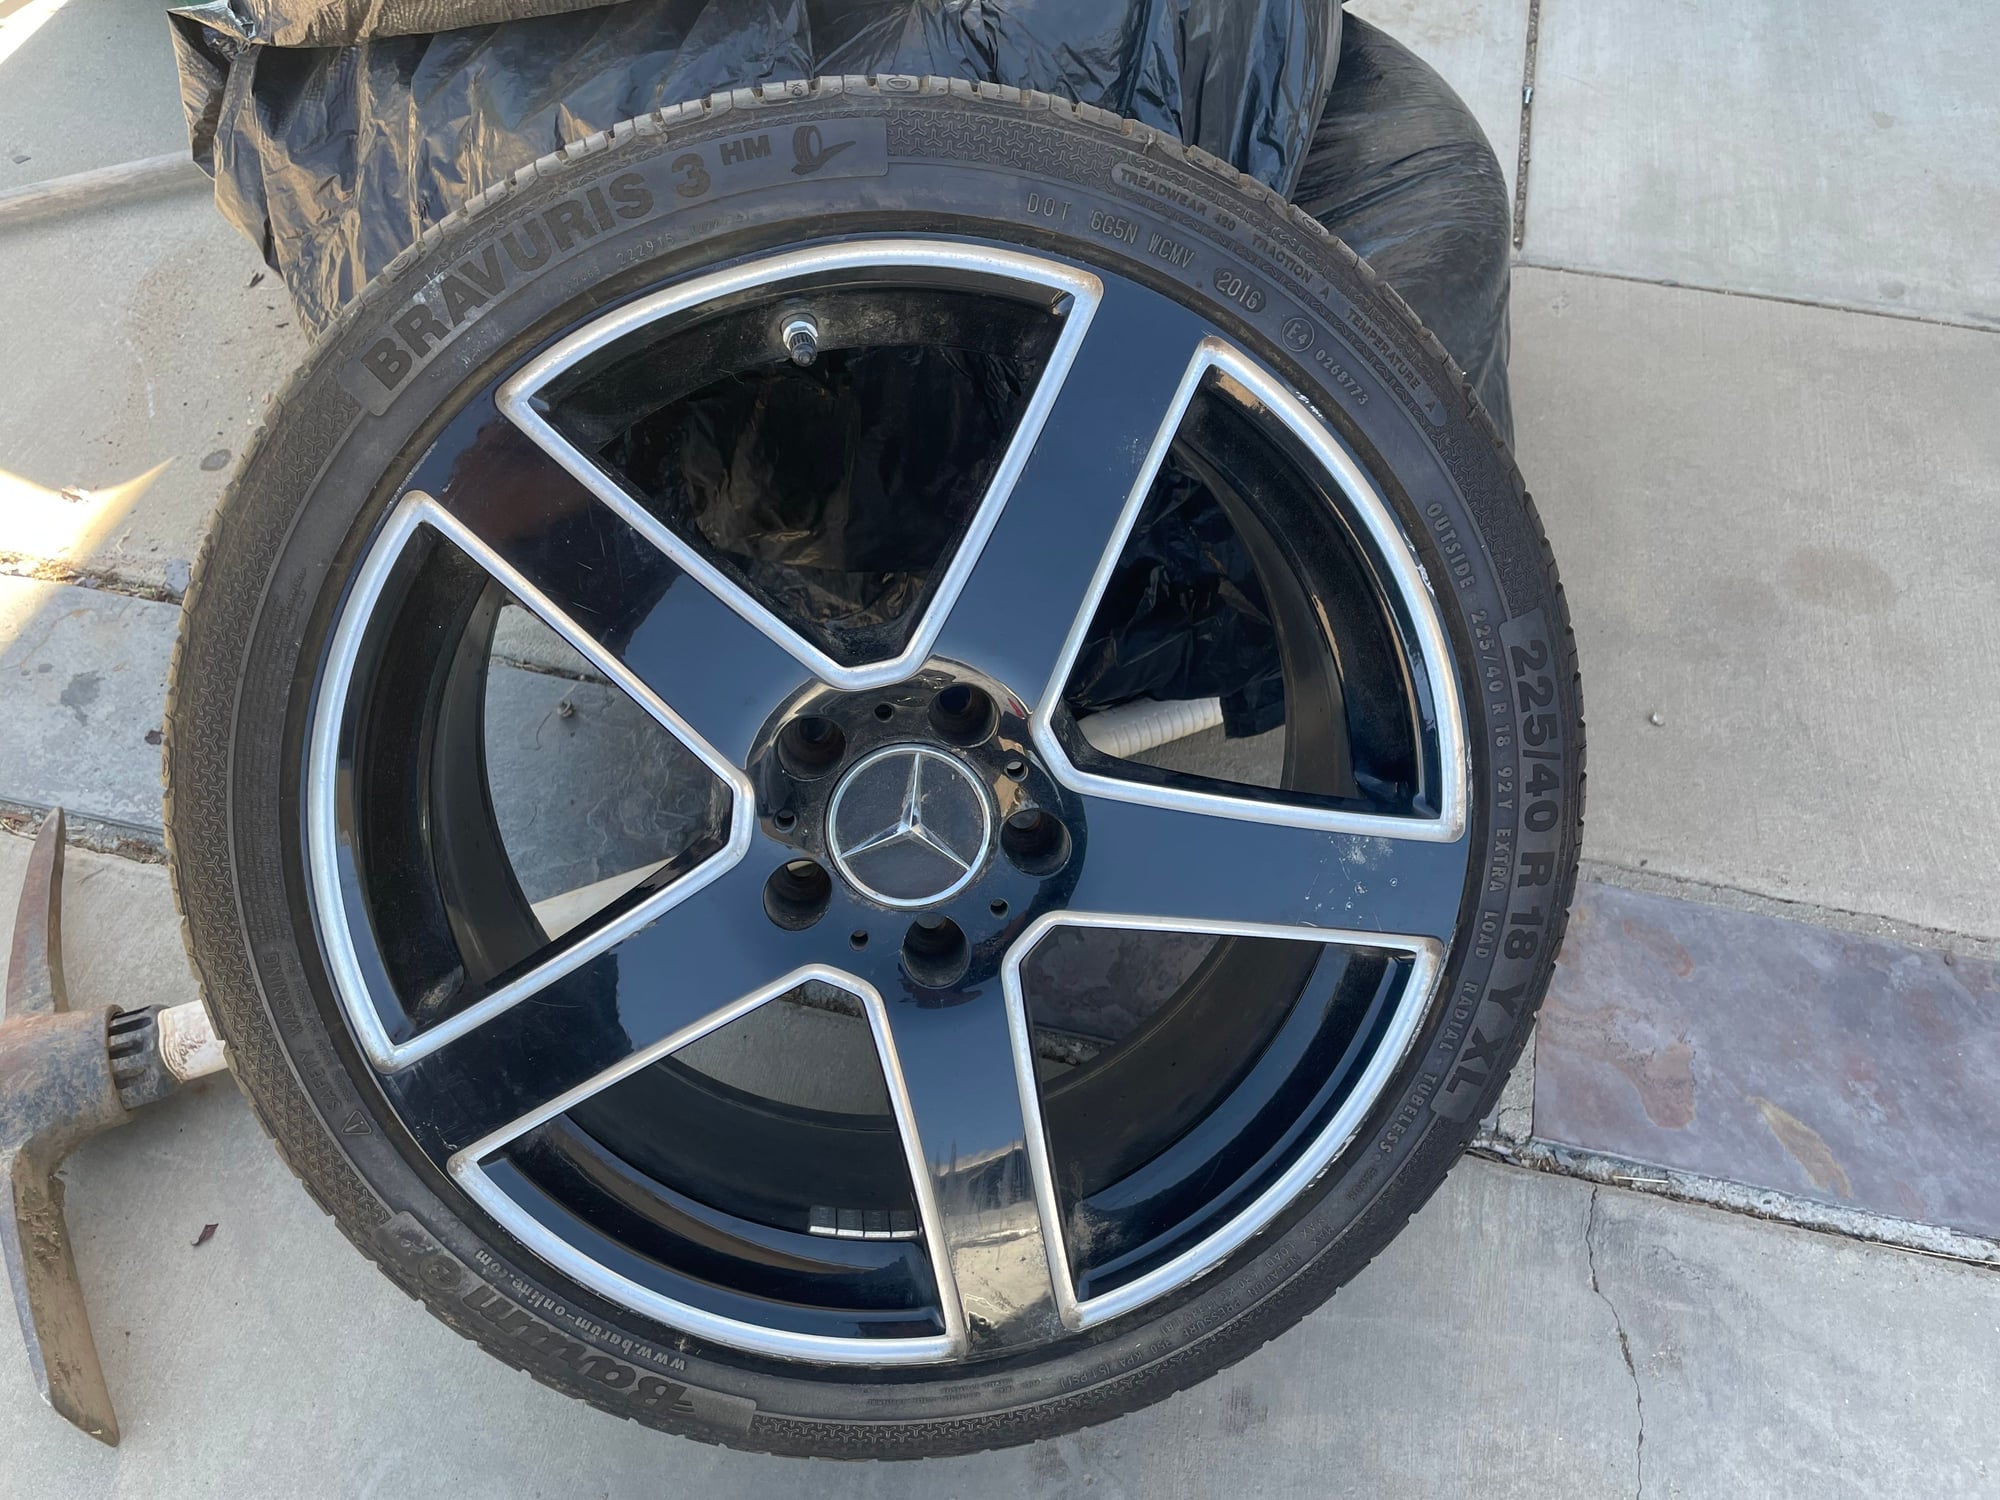 Wheels and Tires/Axles - W204 wheels, tires and TPMS - Used - 2008 to 2013 Mercedes-Benz C300 - Los Angeles, CA 90301, United States